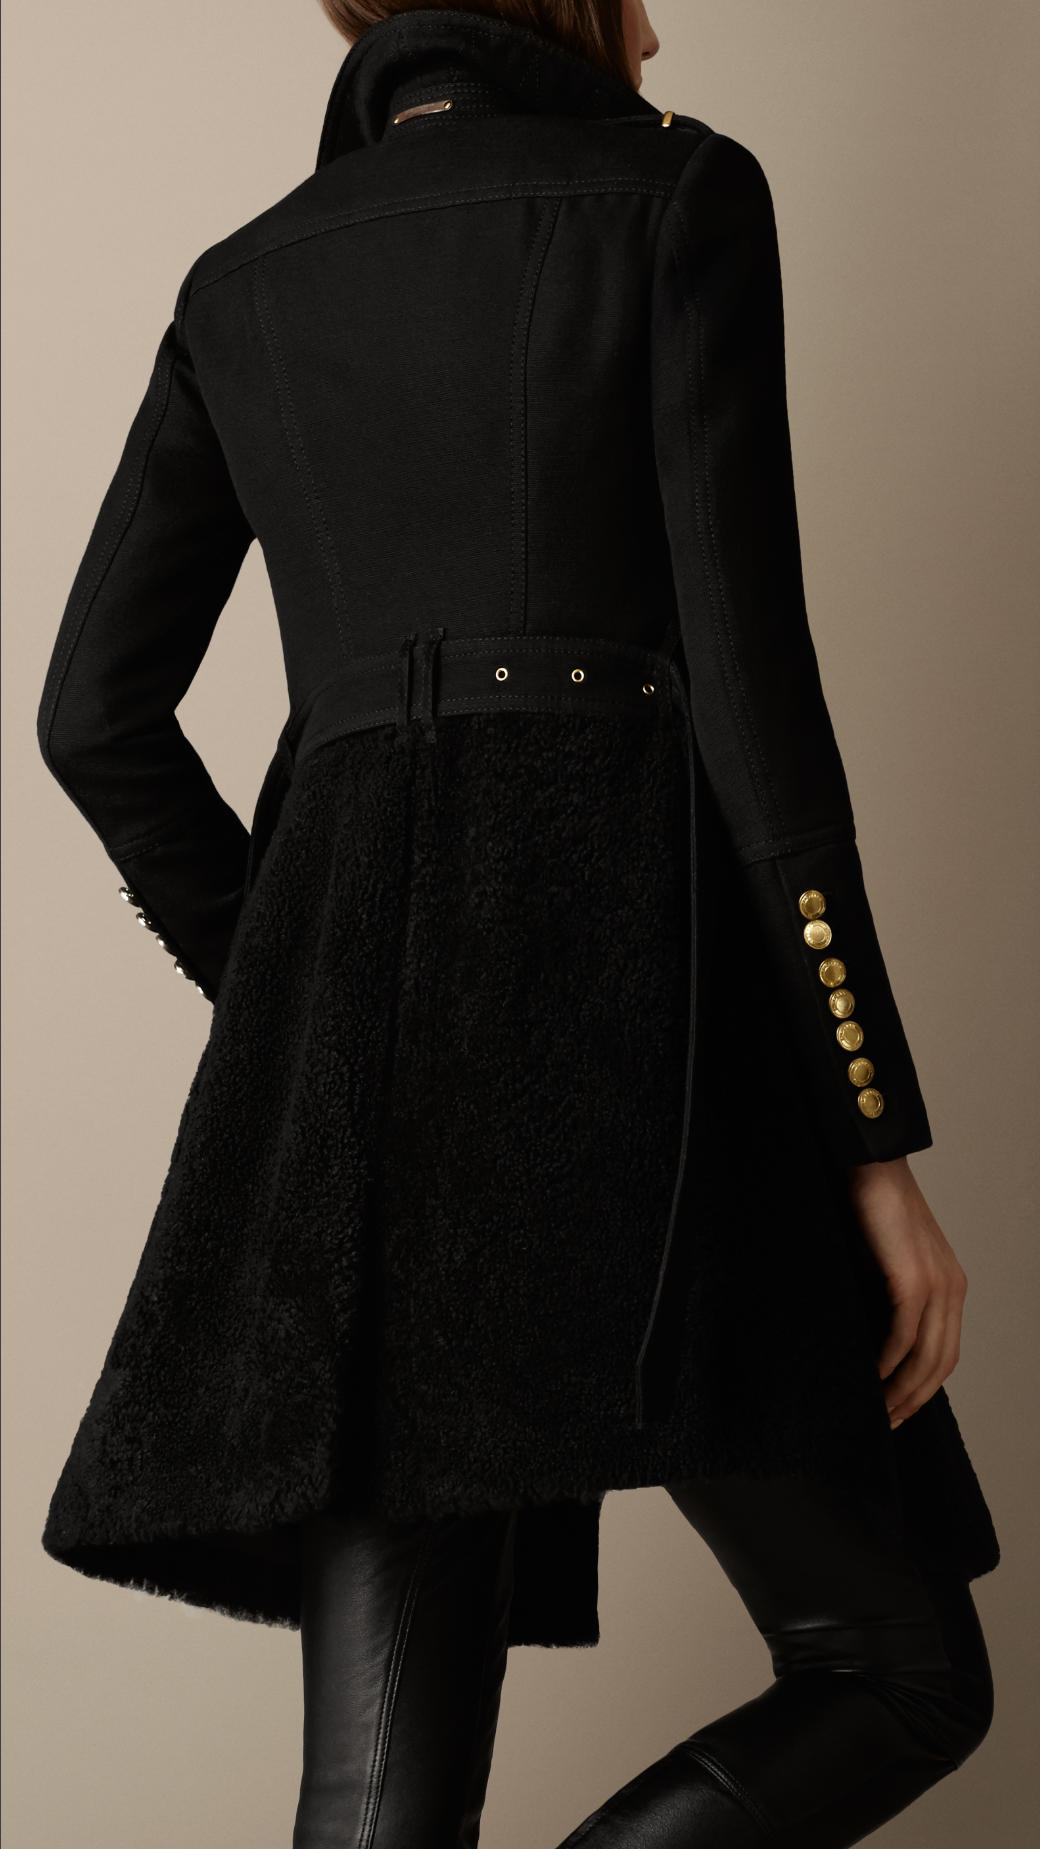 Lyst - Burberry Shearling Skirt Fitted Coat in Black